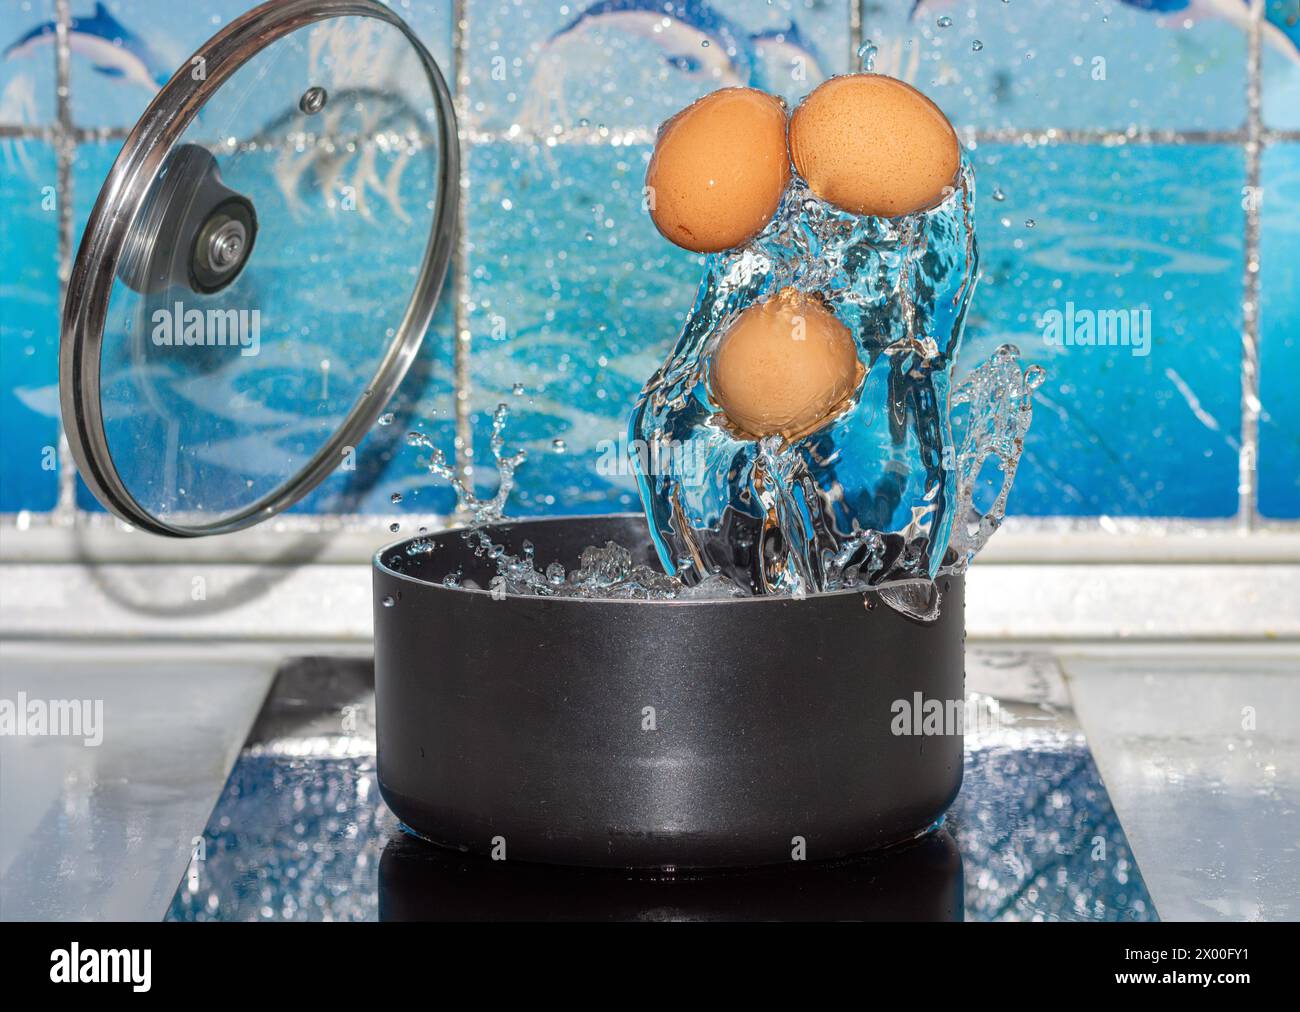 Eggs are boiled in a pot on the stove Stock Photo